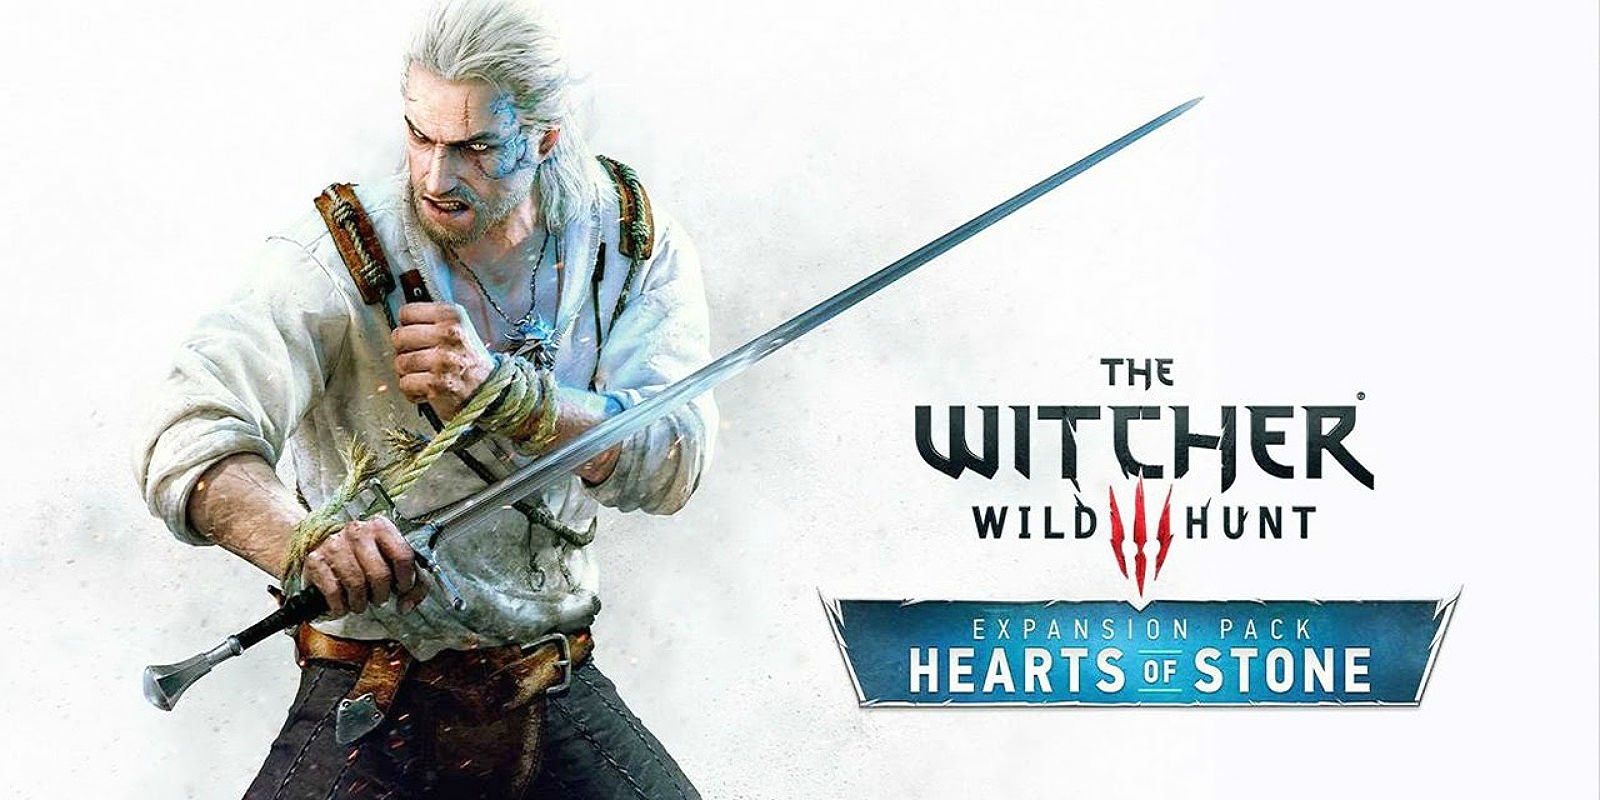 Promotional art of Geralt and text describing The Witcher 3 Wild Hunt Hearts of Stone expansion pack